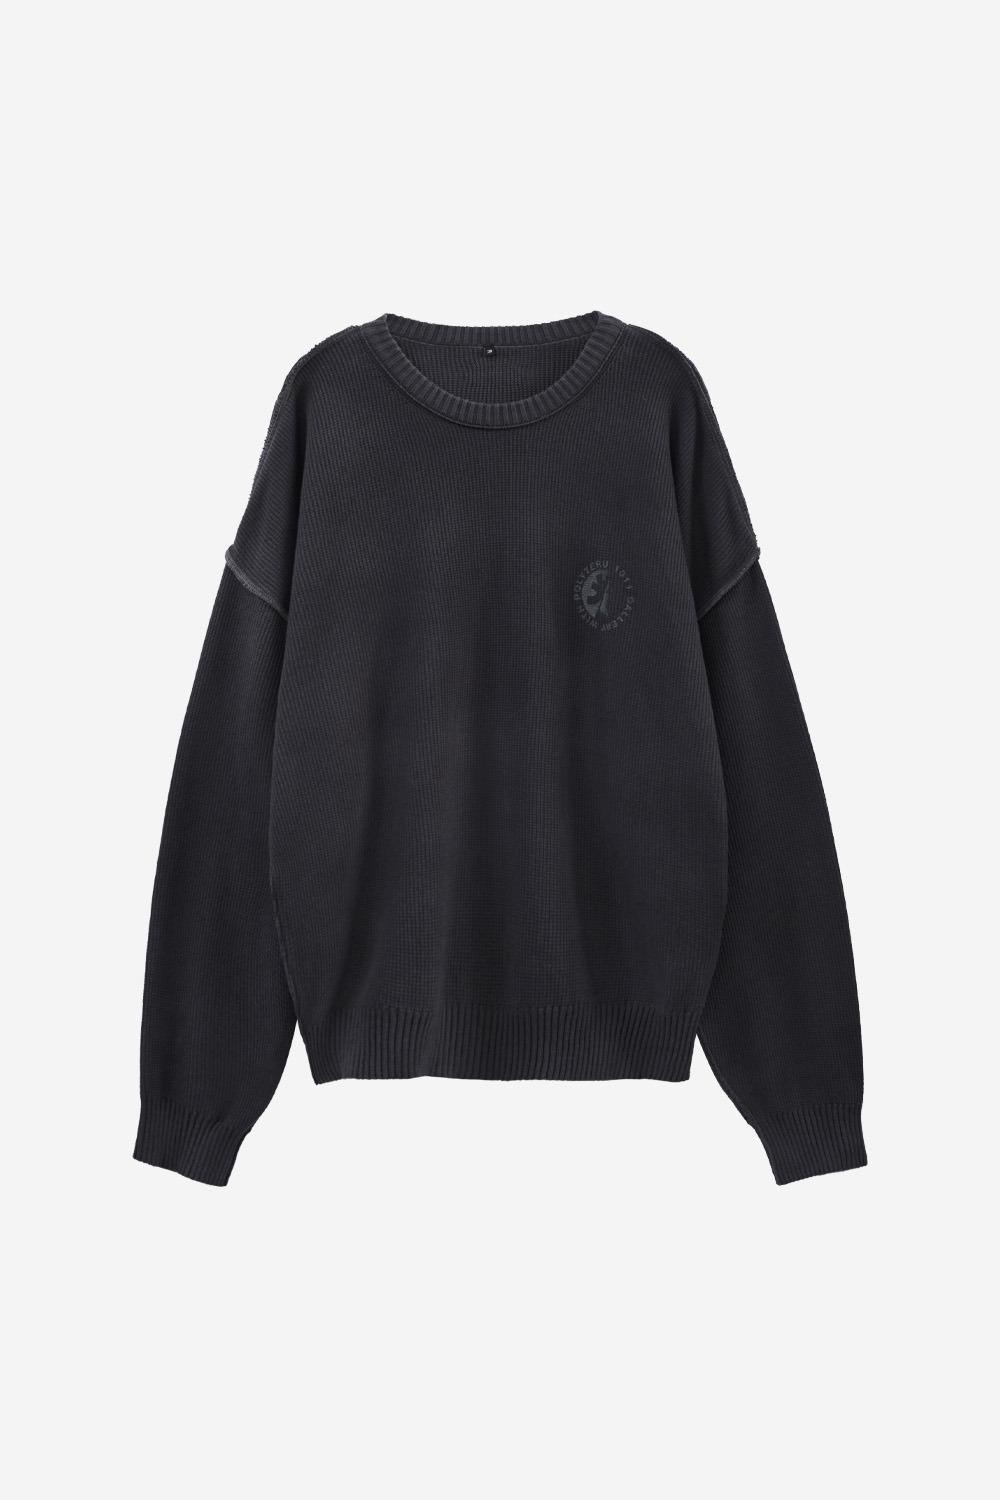 1011 Reversed Graphic Waffle Knit-Charcoal